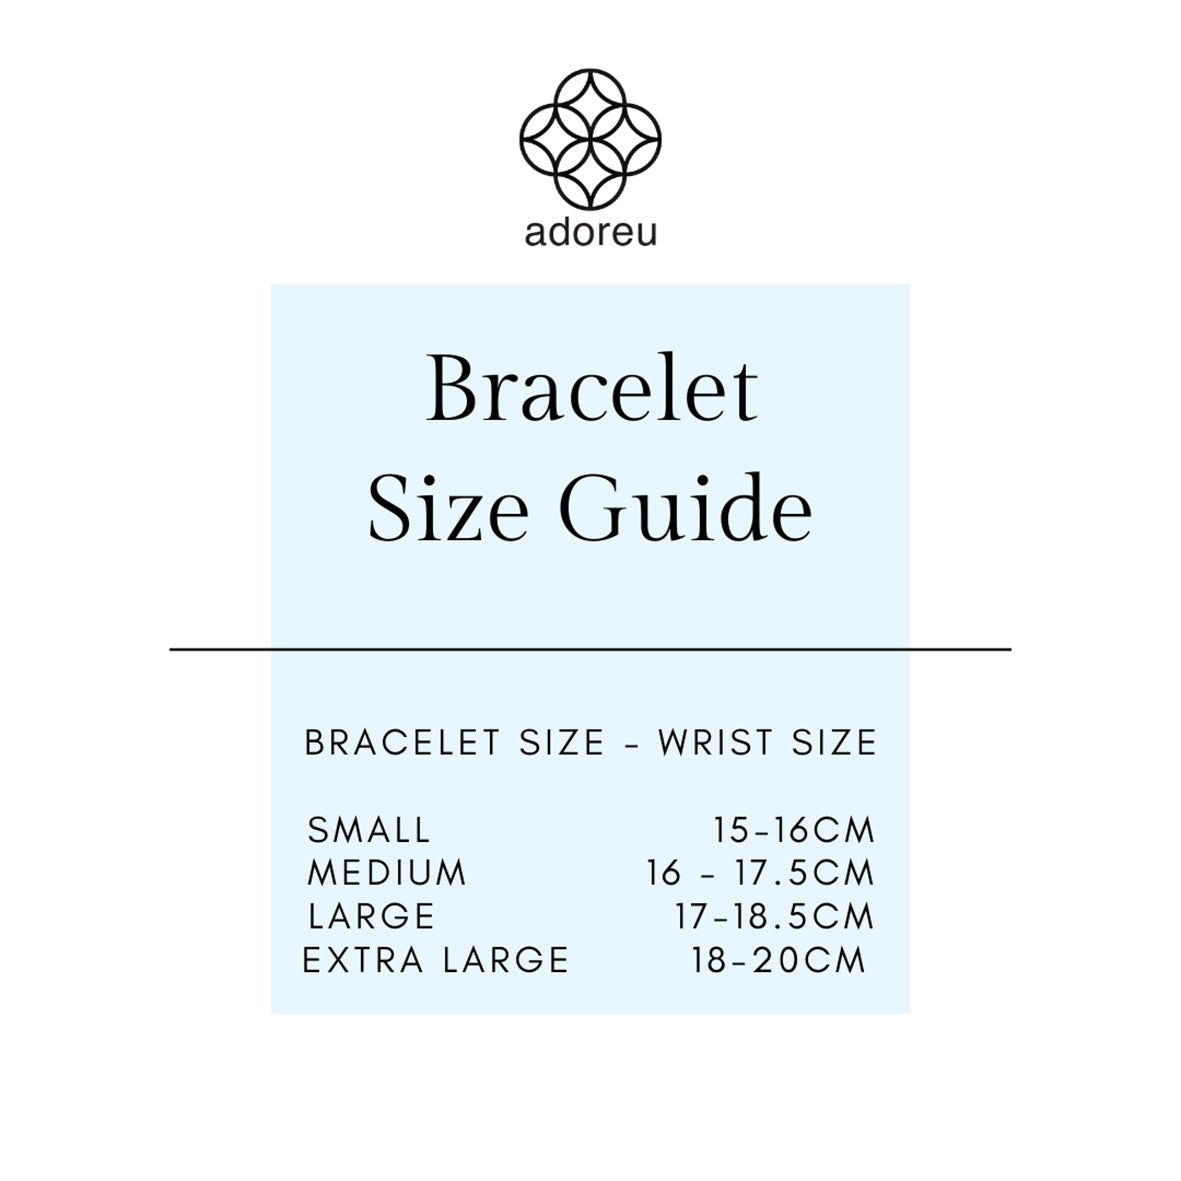 bracelet size guide for adoreu jewellery arm candy